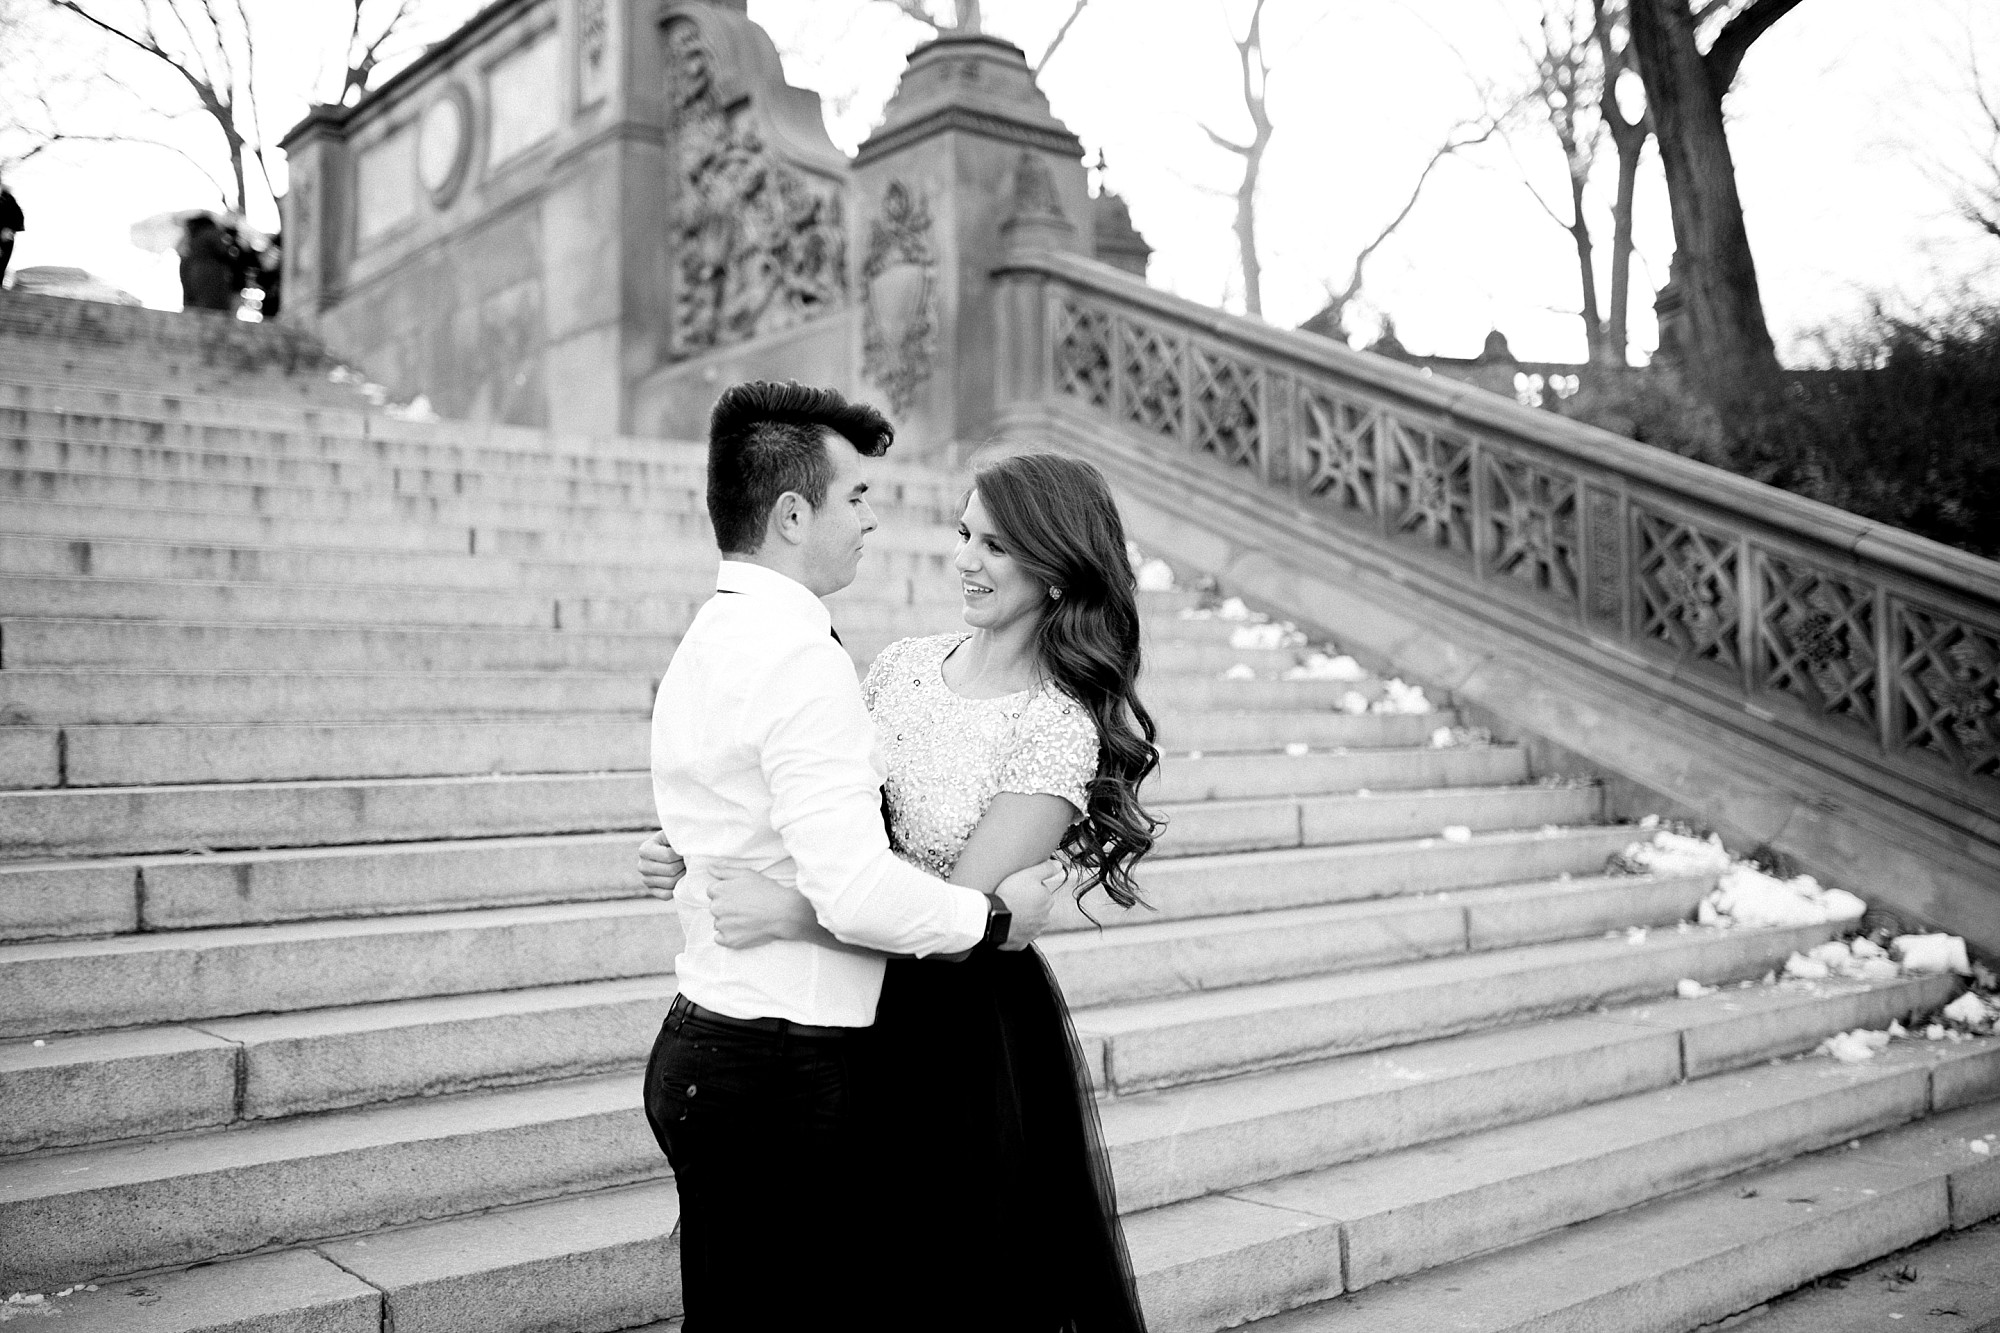 A Winter Anniversary Session in Central Park, NYC - Manhattan by Breanne Rochelle Photography.